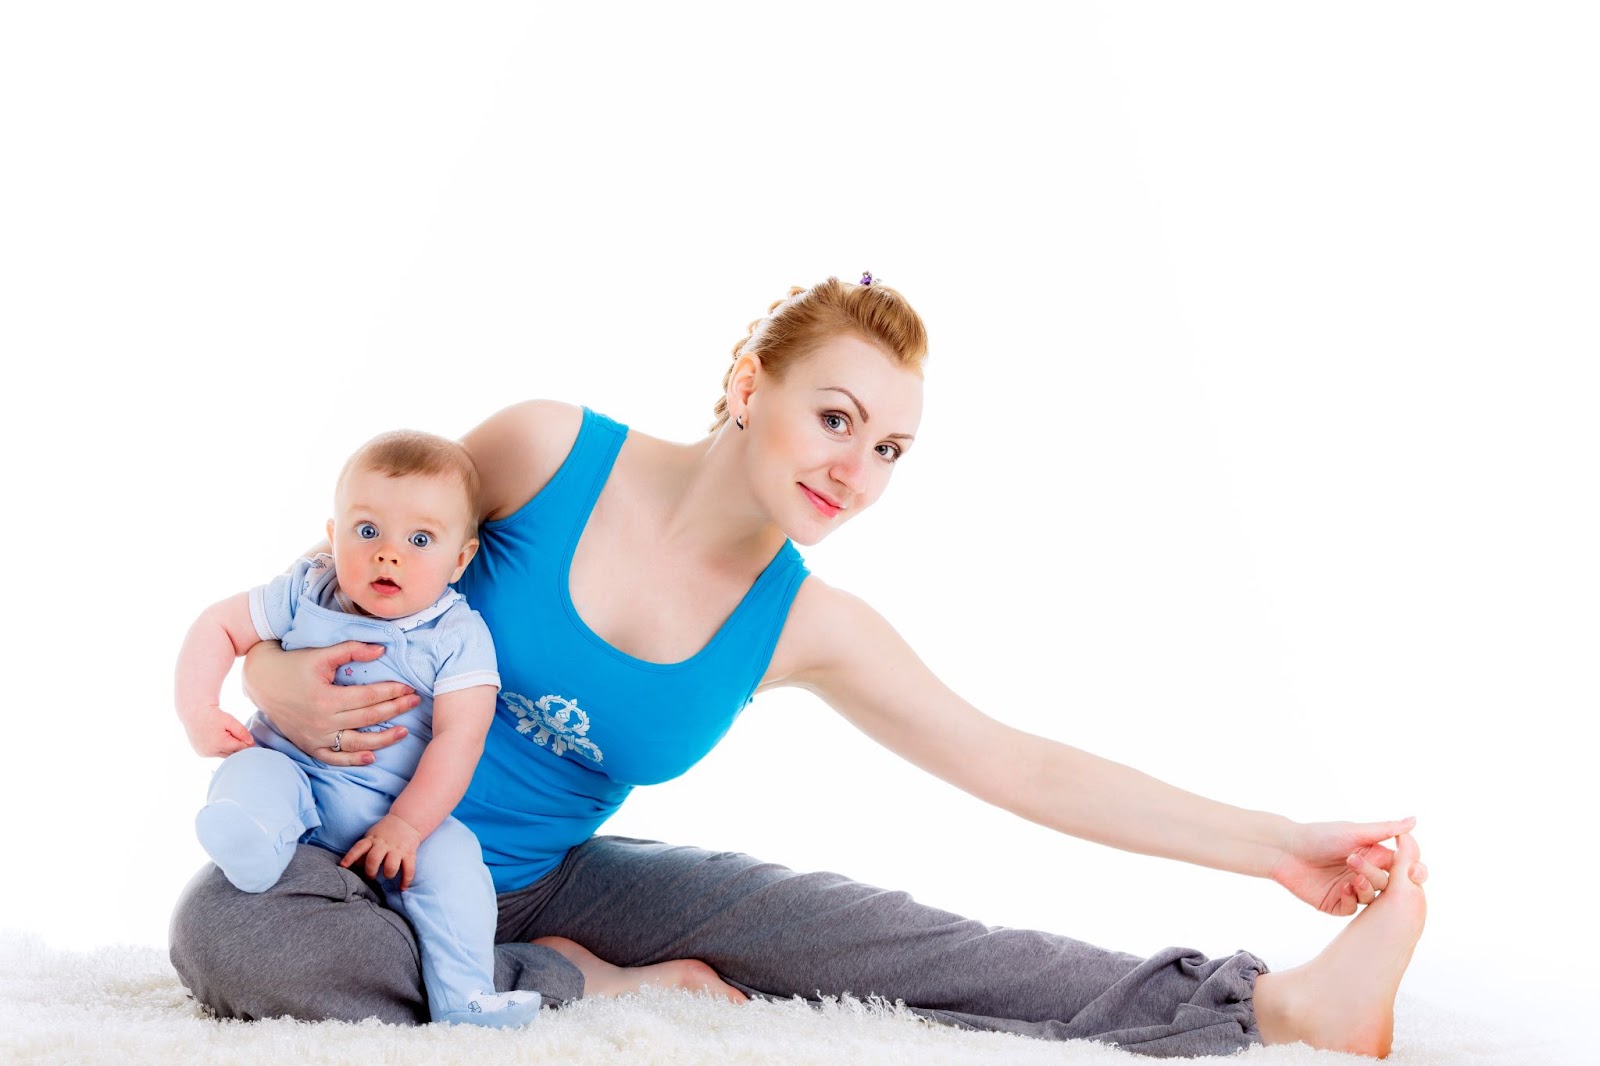 Young mother wears a post-pregnancy belt under her clothes as she stretches on an exercise mat with her baby.